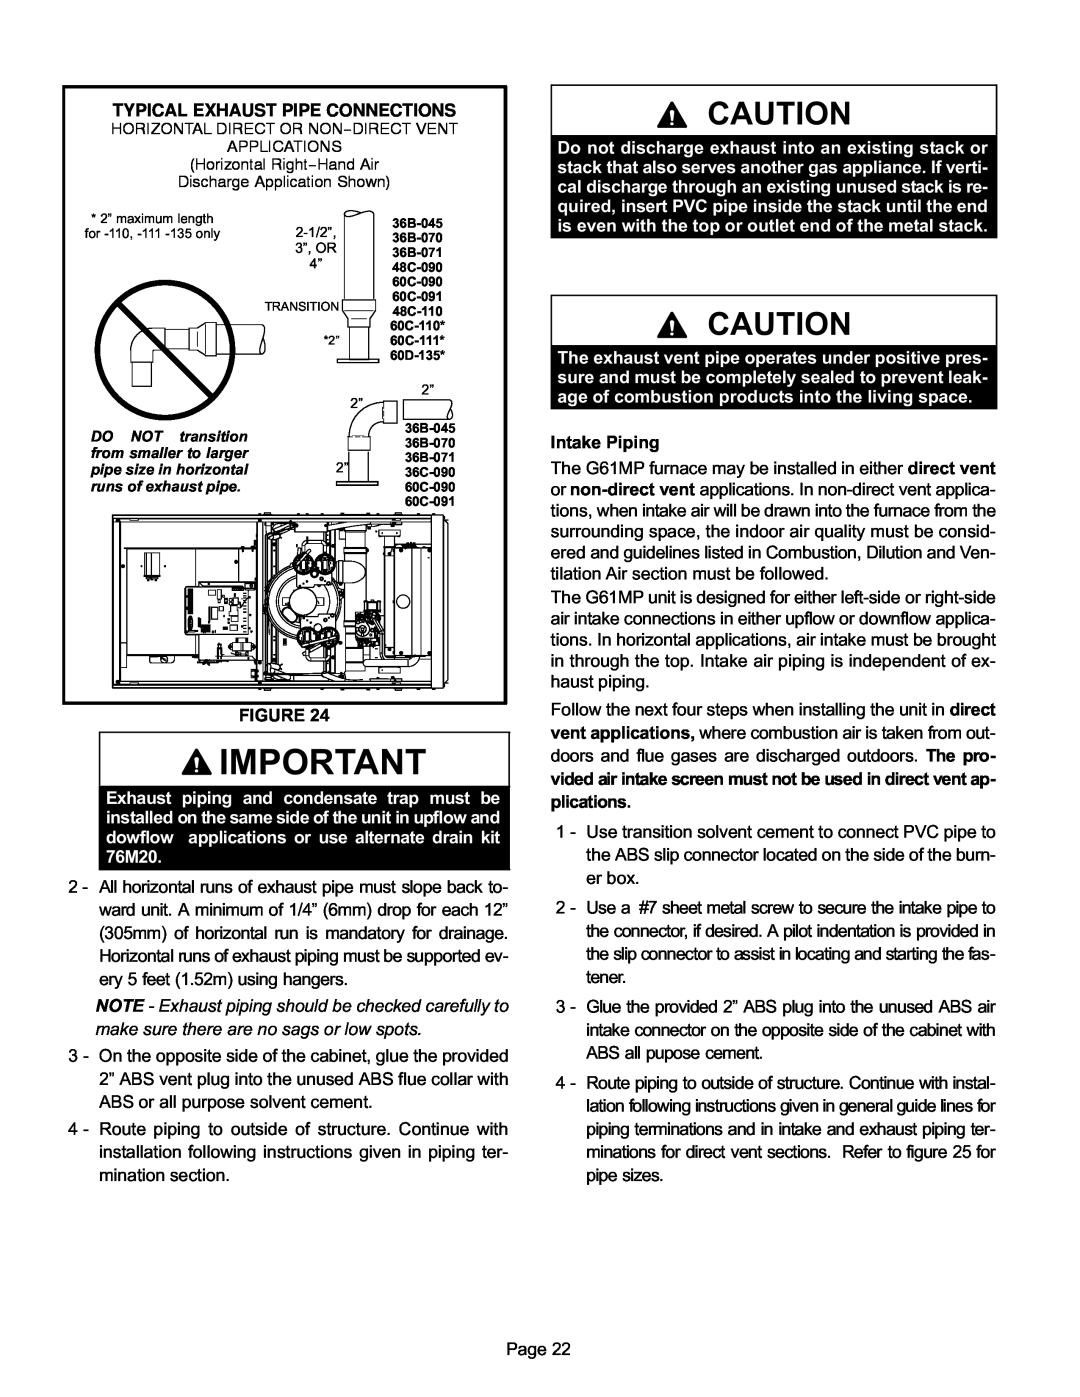 Lennox International Inc Gas Units, G61MP Series Units installation instructions Typical Exhaust Pipe Connections 